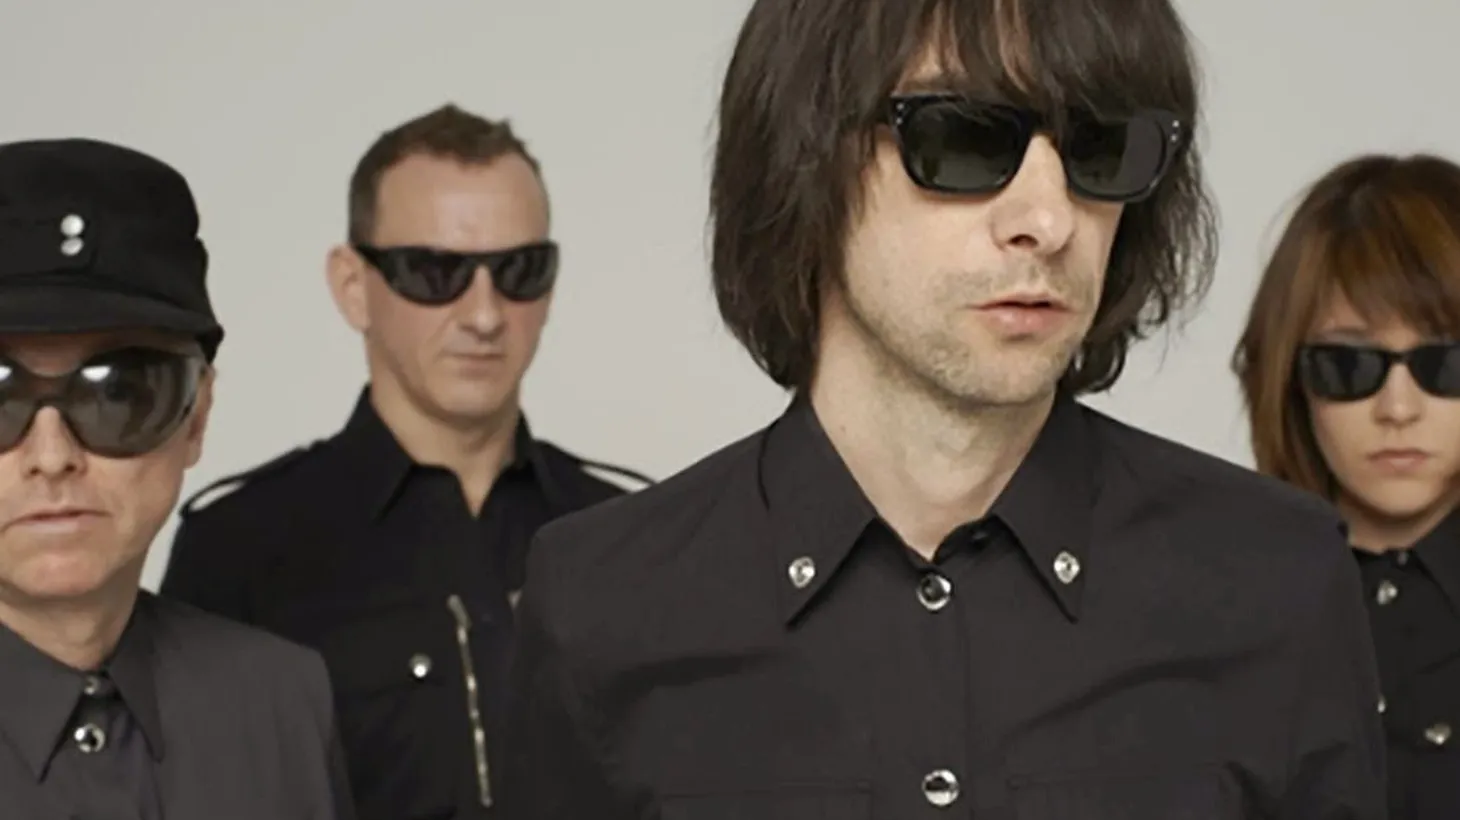 Scottish rockers Primal Scream bring psychedelic blues inflected with 60s vibes to our studio for a live set.